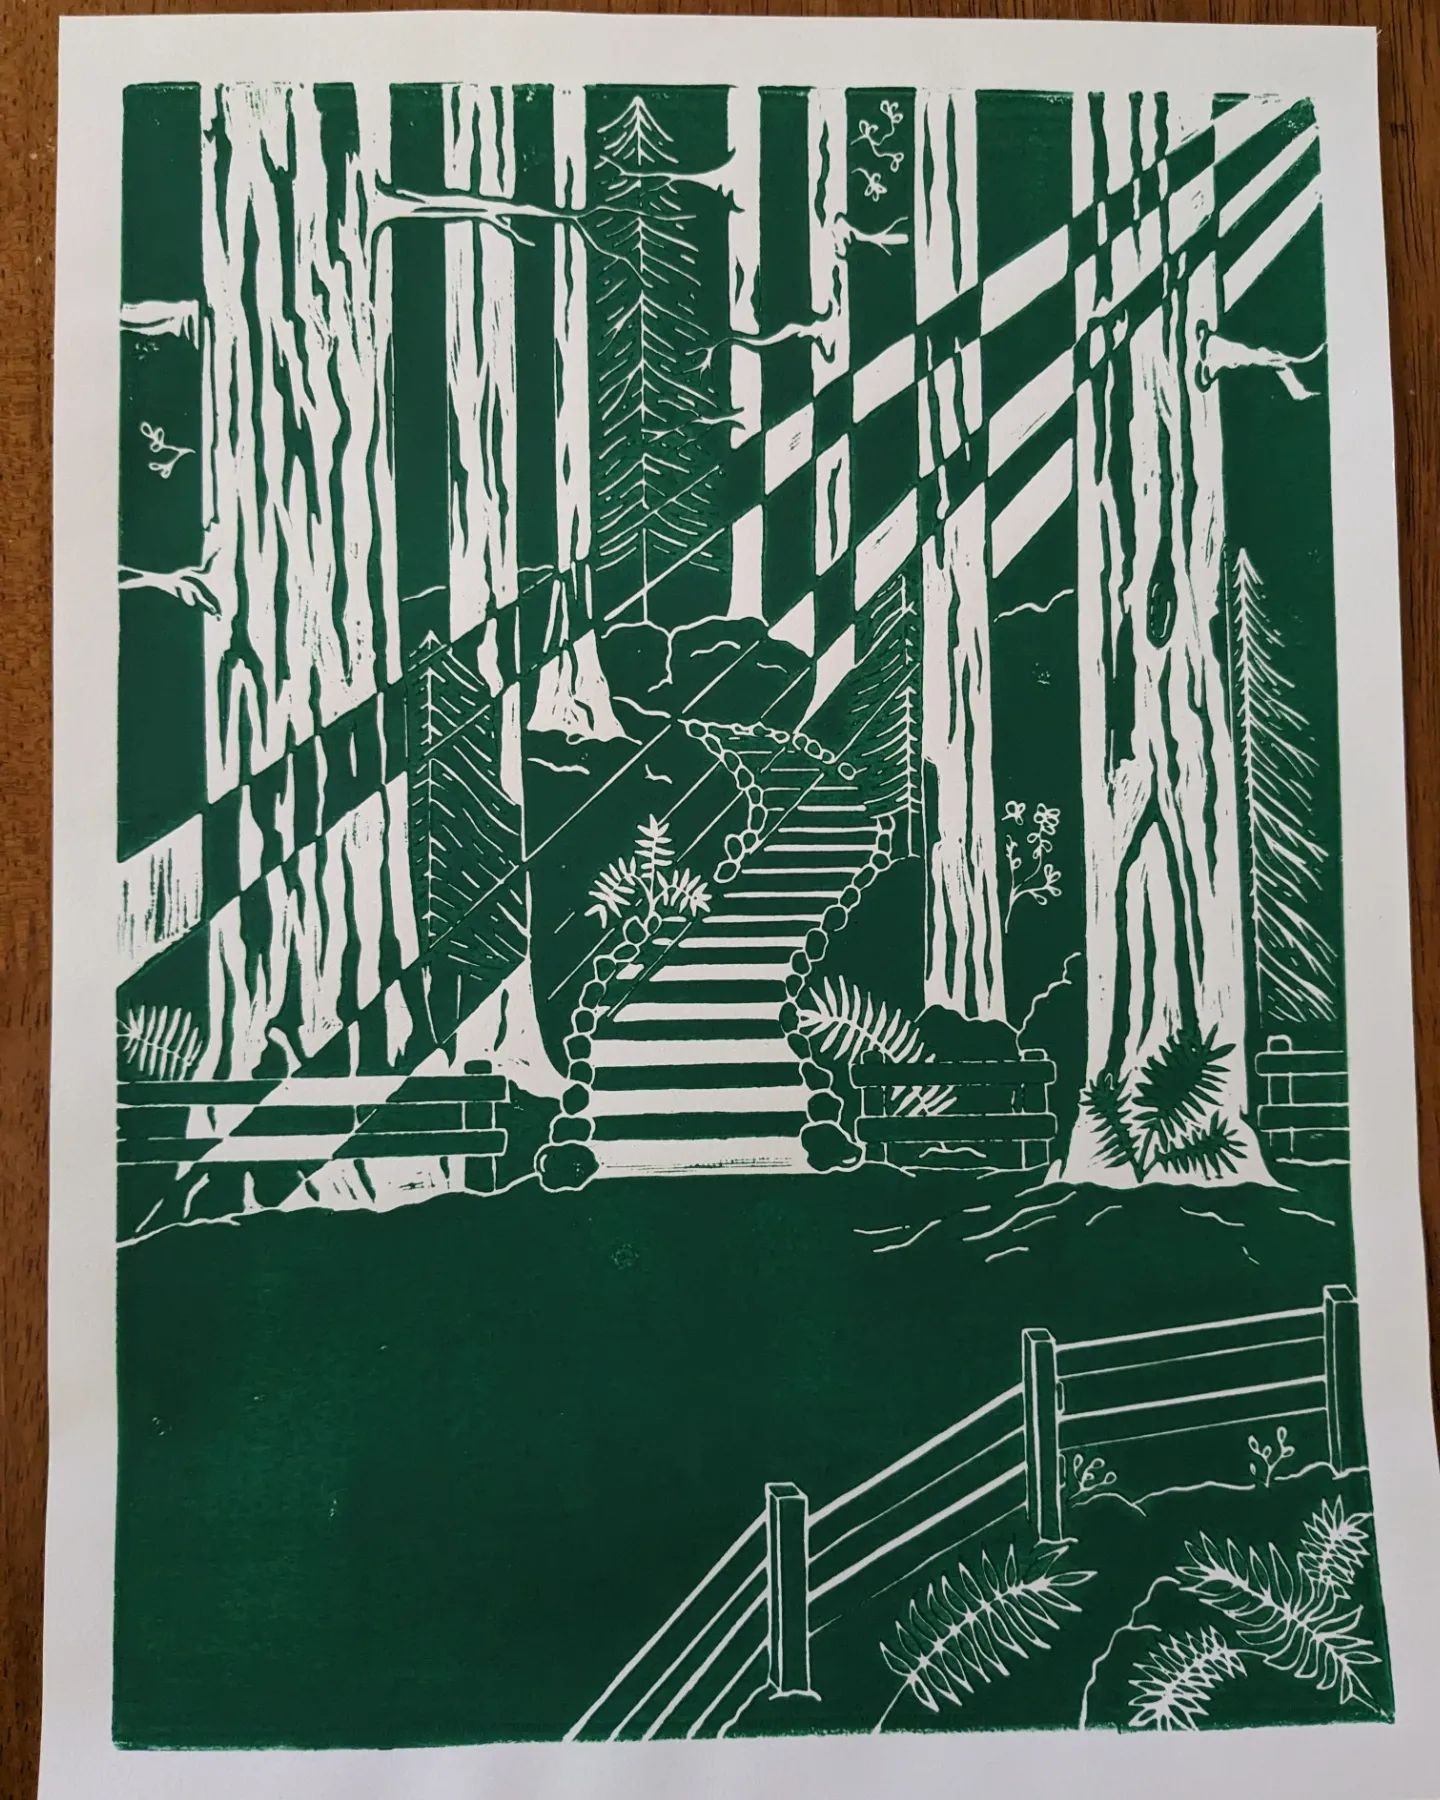 ART &harr;️ TRAILWORK
Check out this lino-cut print by Sarah Dey (@sarahdeydeydey ), inspired by some recent trailwork! 

This past winter, the Redwood Creek Crew (part of @goldengatenps ) re-built this serpentine redwood-and-stone staircase on the B